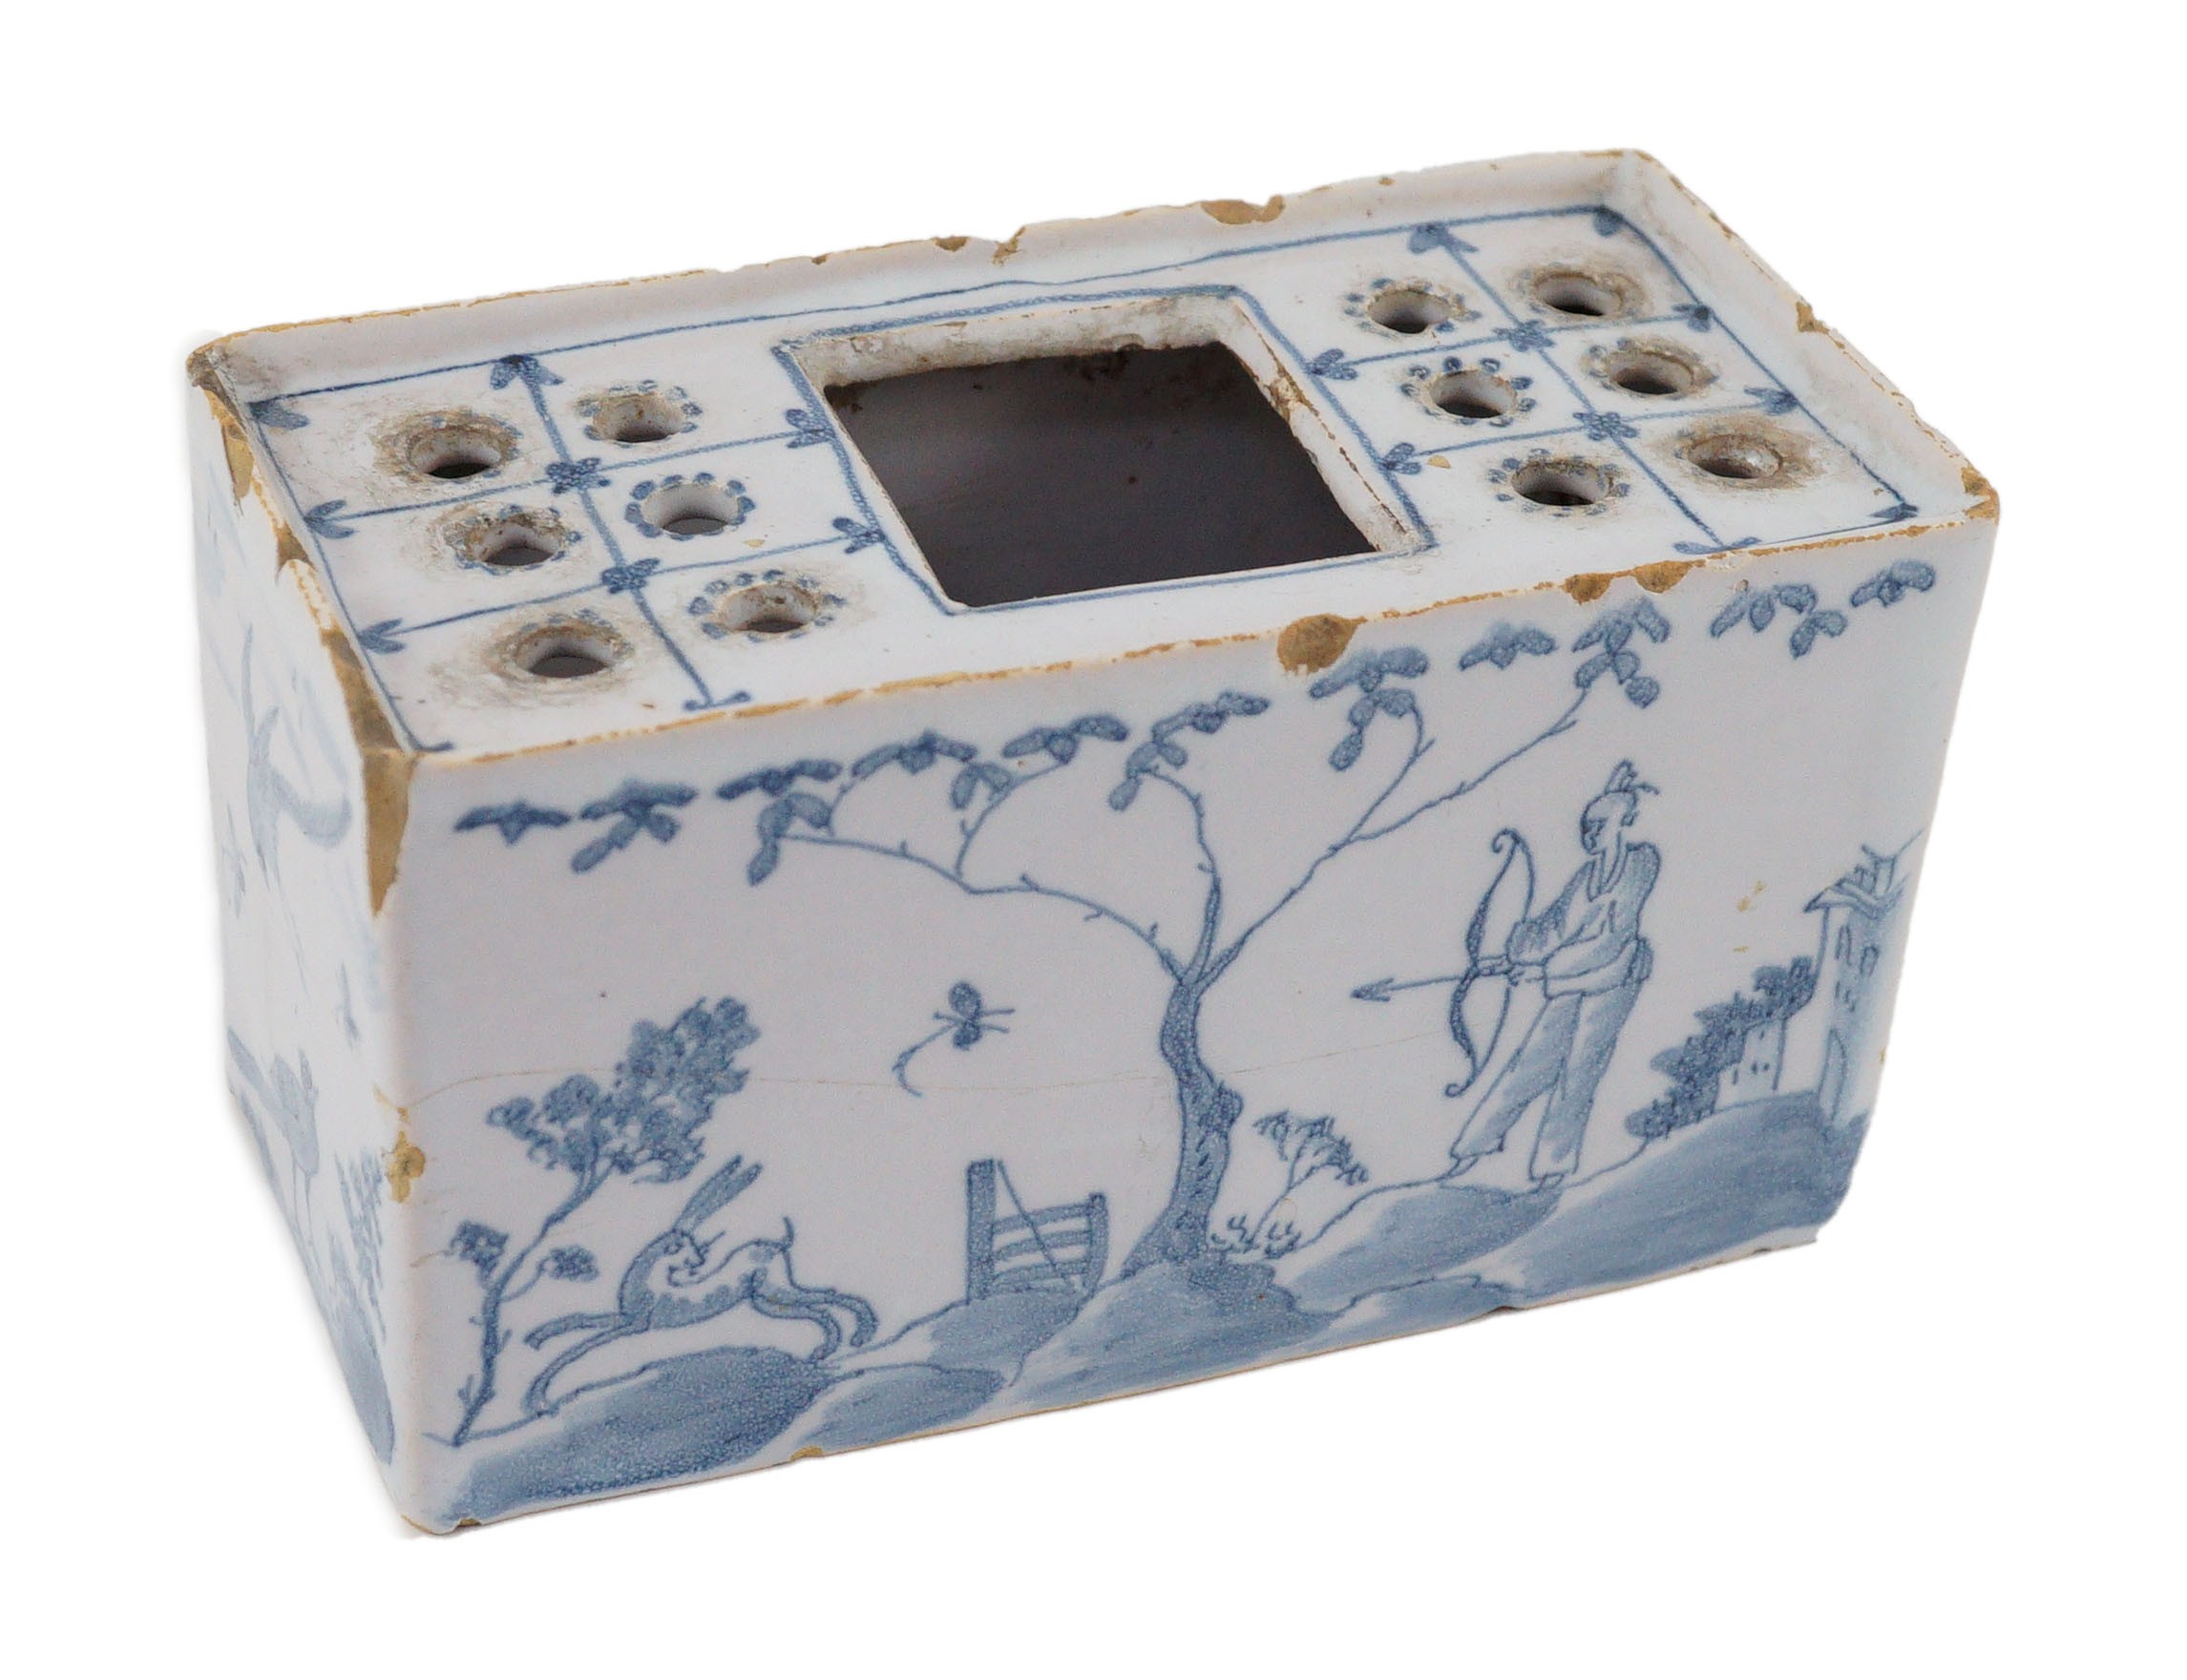 An English delftware flower brick, mid 18th century, 14.5cm wide, chips and crack